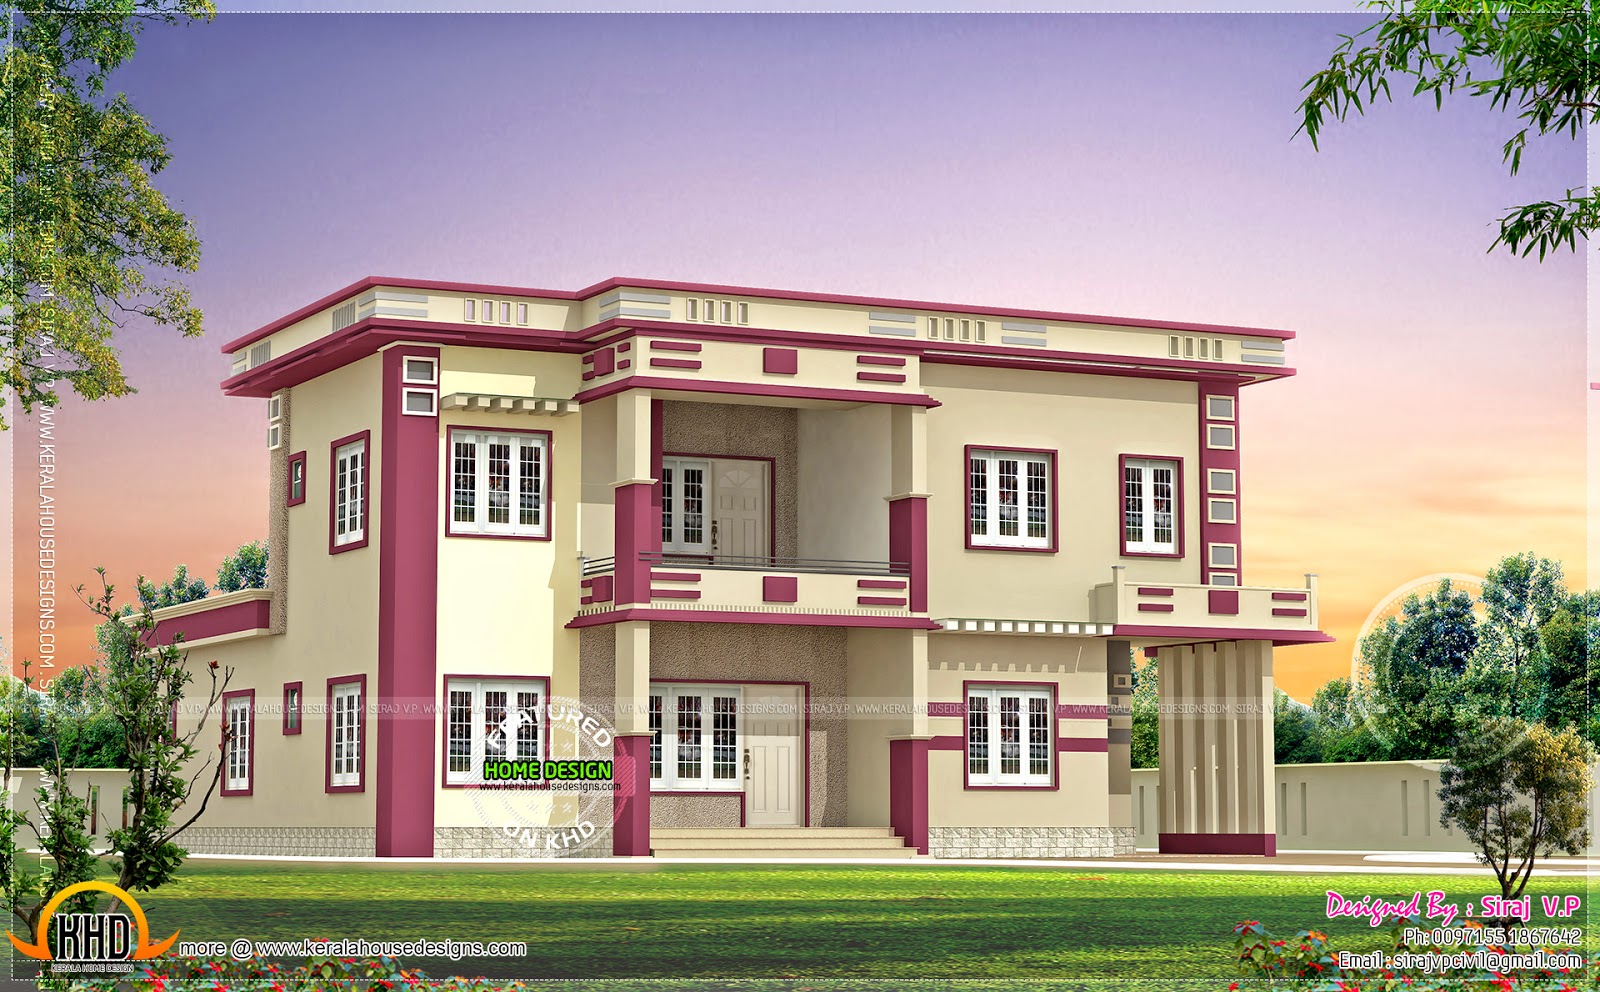 Kerala Home Design And Floor Plans Contemporary Villa In Coloring Wallpapers Download Free Images Wallpaper [coloring436.blogspot.com]